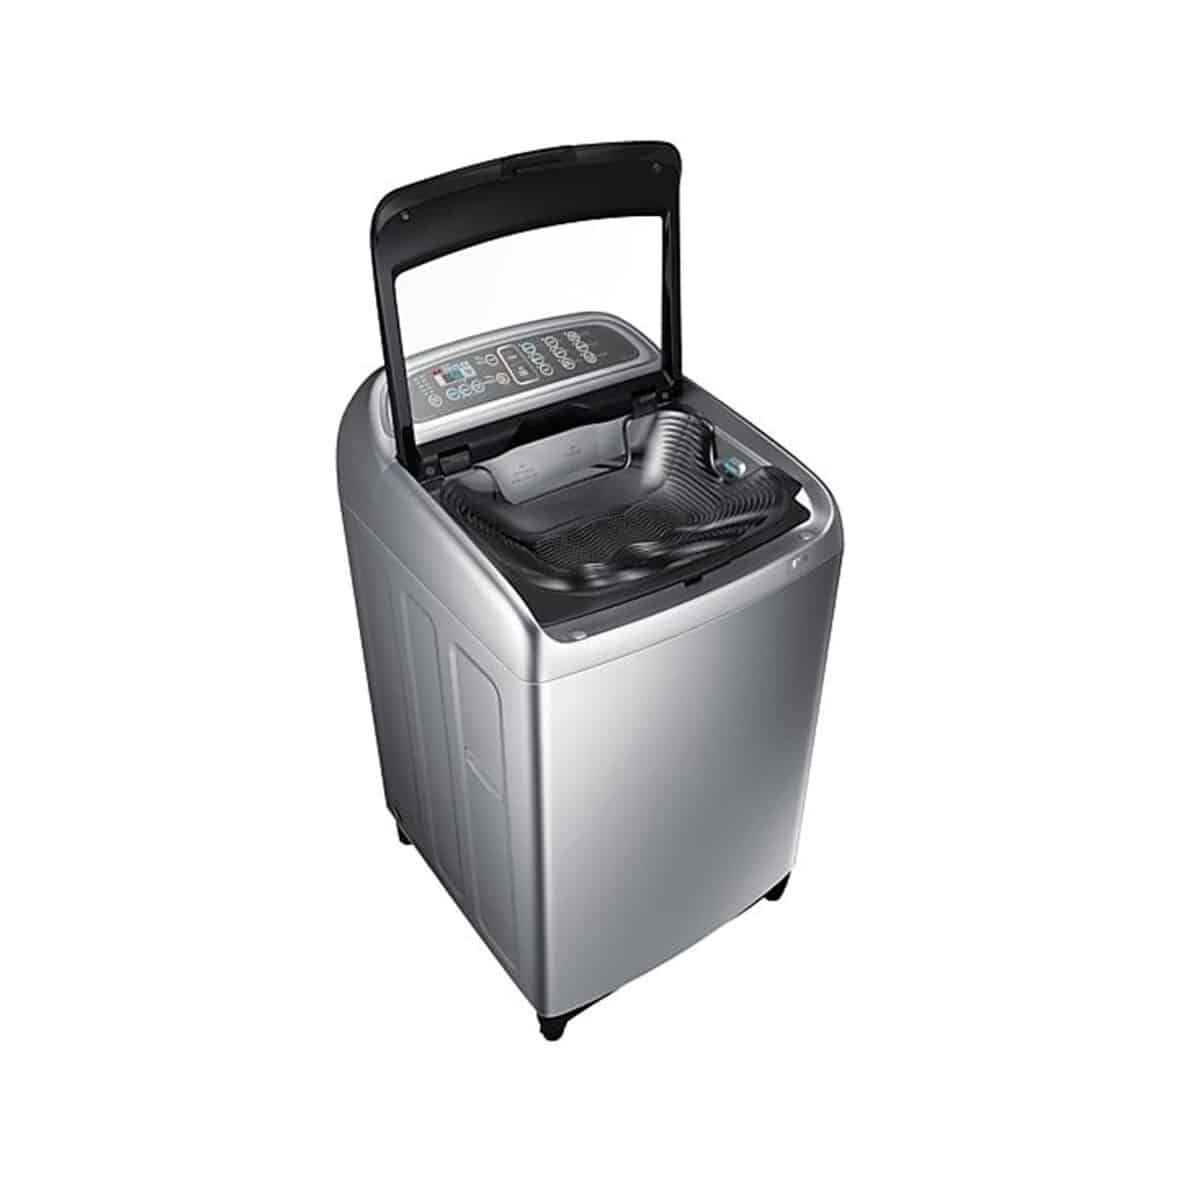 Samsung 13kg Top Load Fully Automatic Washing Machine